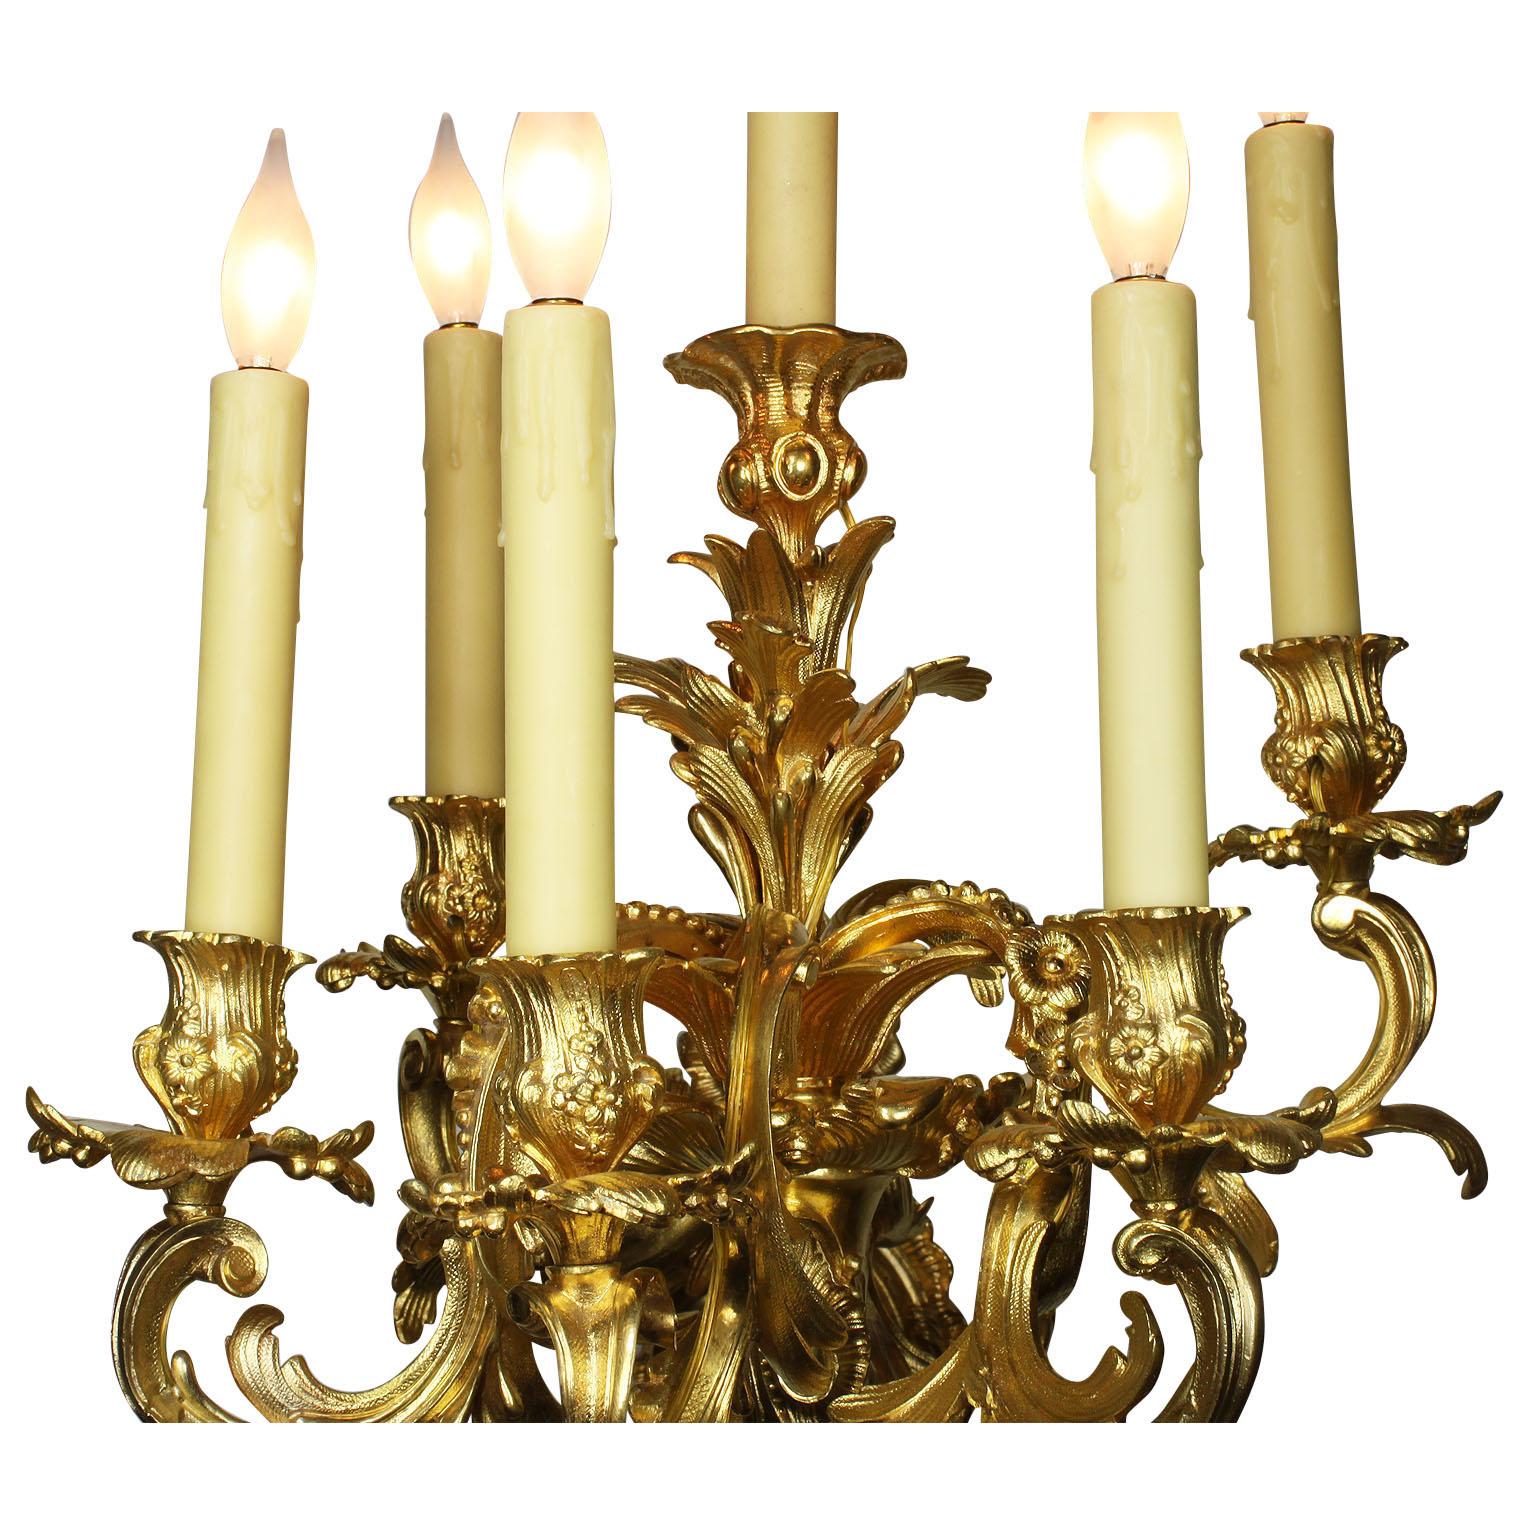 French 19th Century Louis XV Style Rococo Gilt-Bronze Wall Lights Sconces, Pair For Sale 2